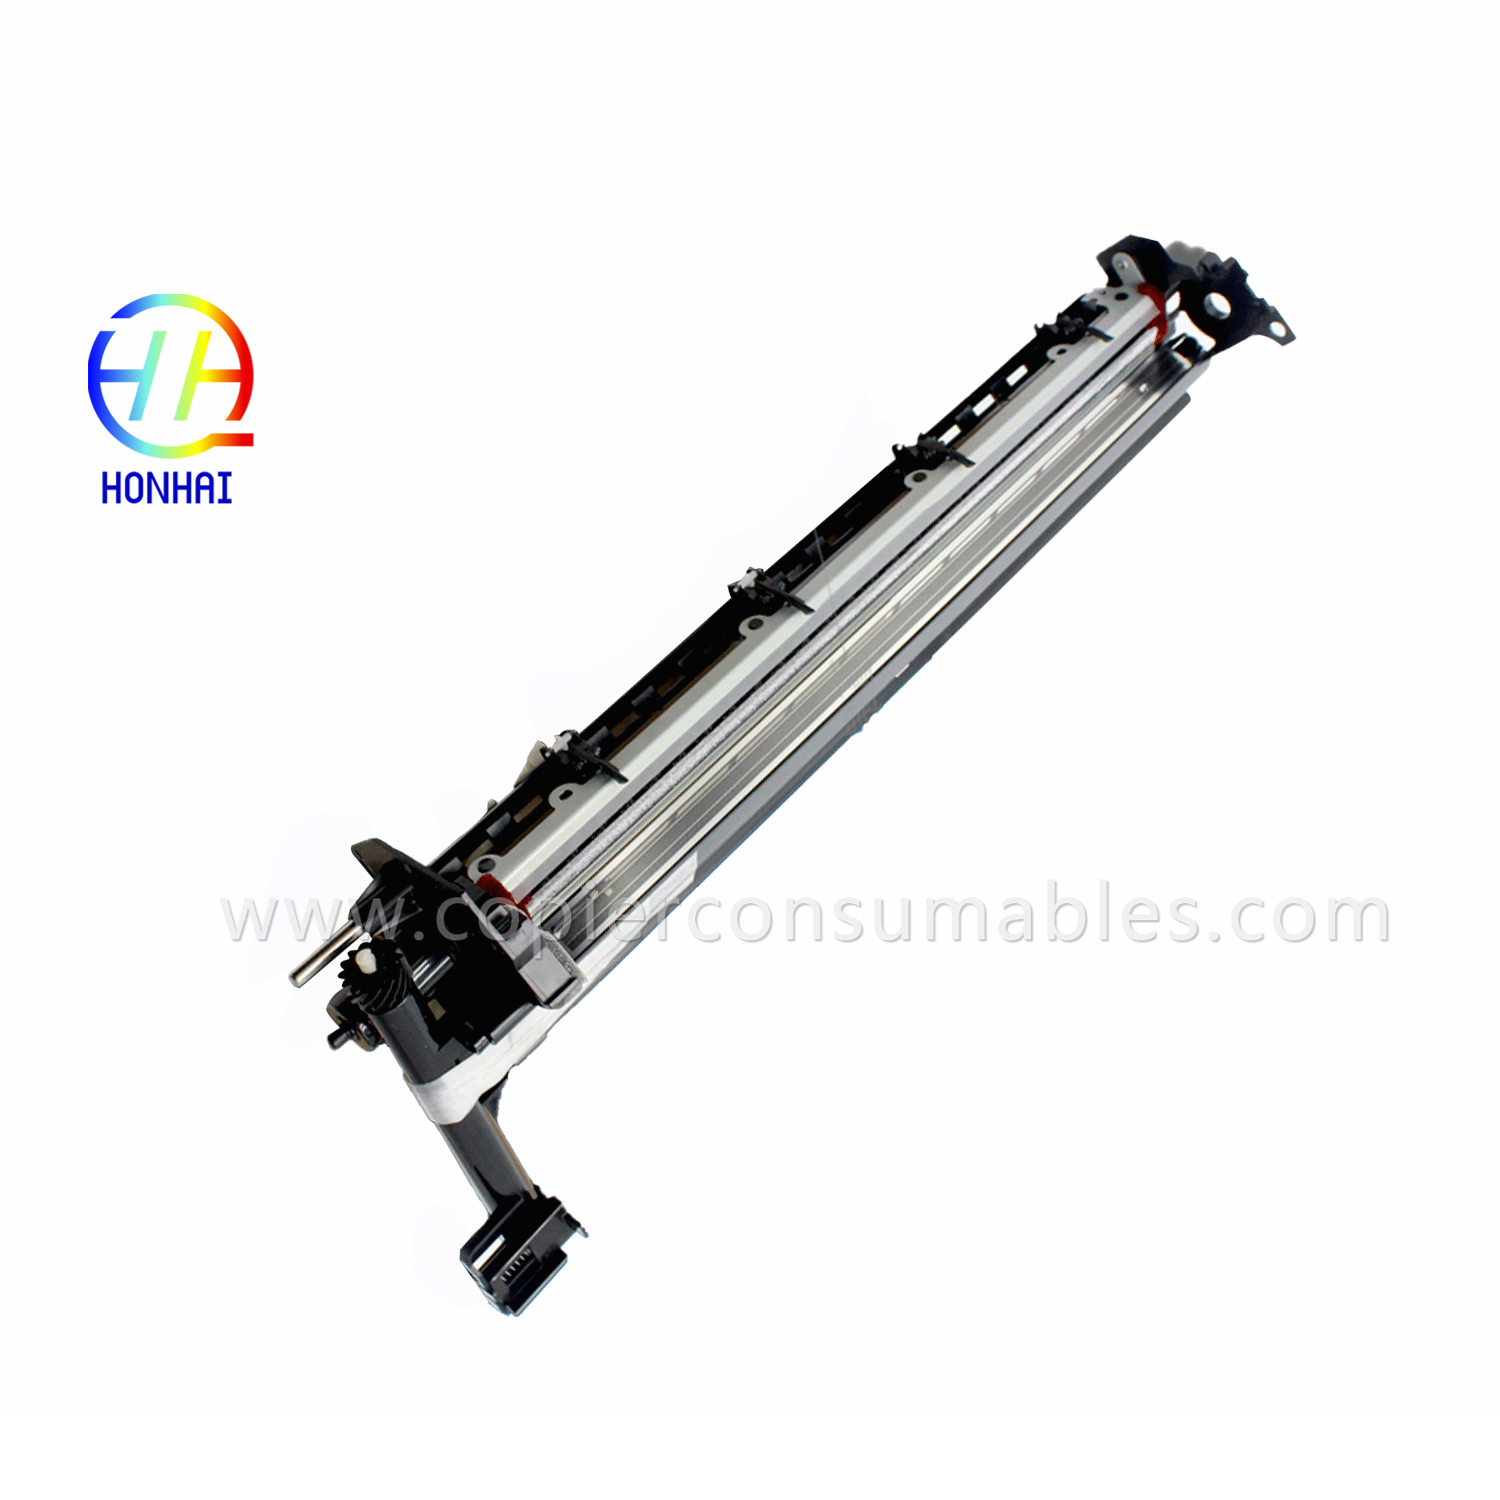 Drum Frame Assembly for Sharp Ar-5320 5320d Arm-160 162 205 207 (Sharp CFRM-0021RS5T CFRM-0021RS6D Toshiba 6LS11678000) OEM